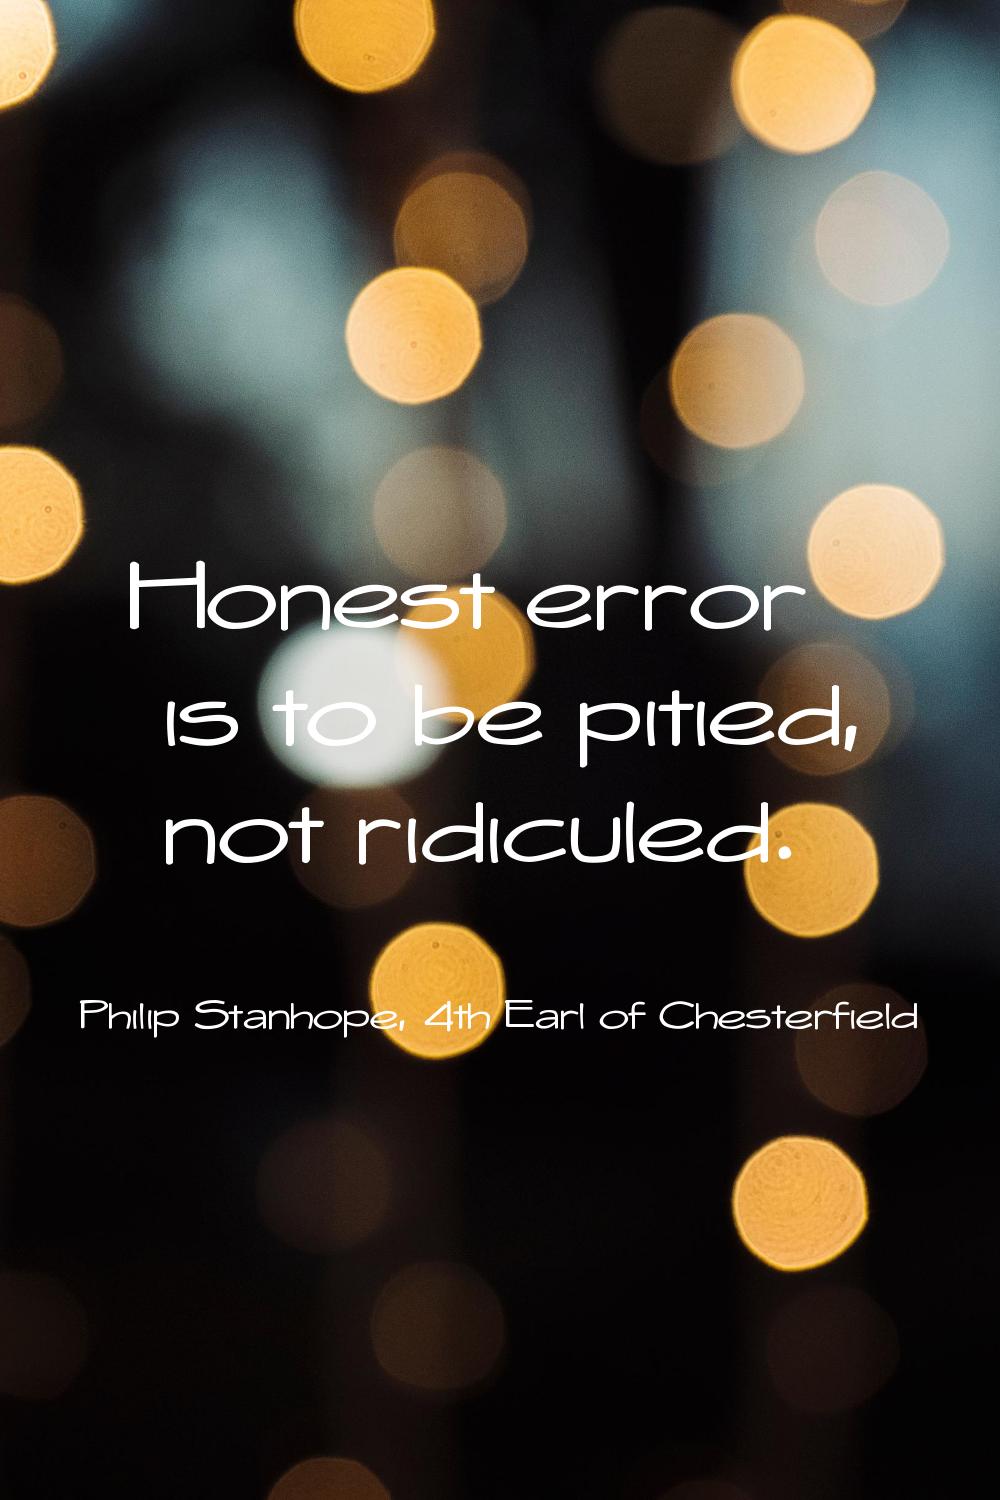 Honest error is to be pitied, not ridiculed.